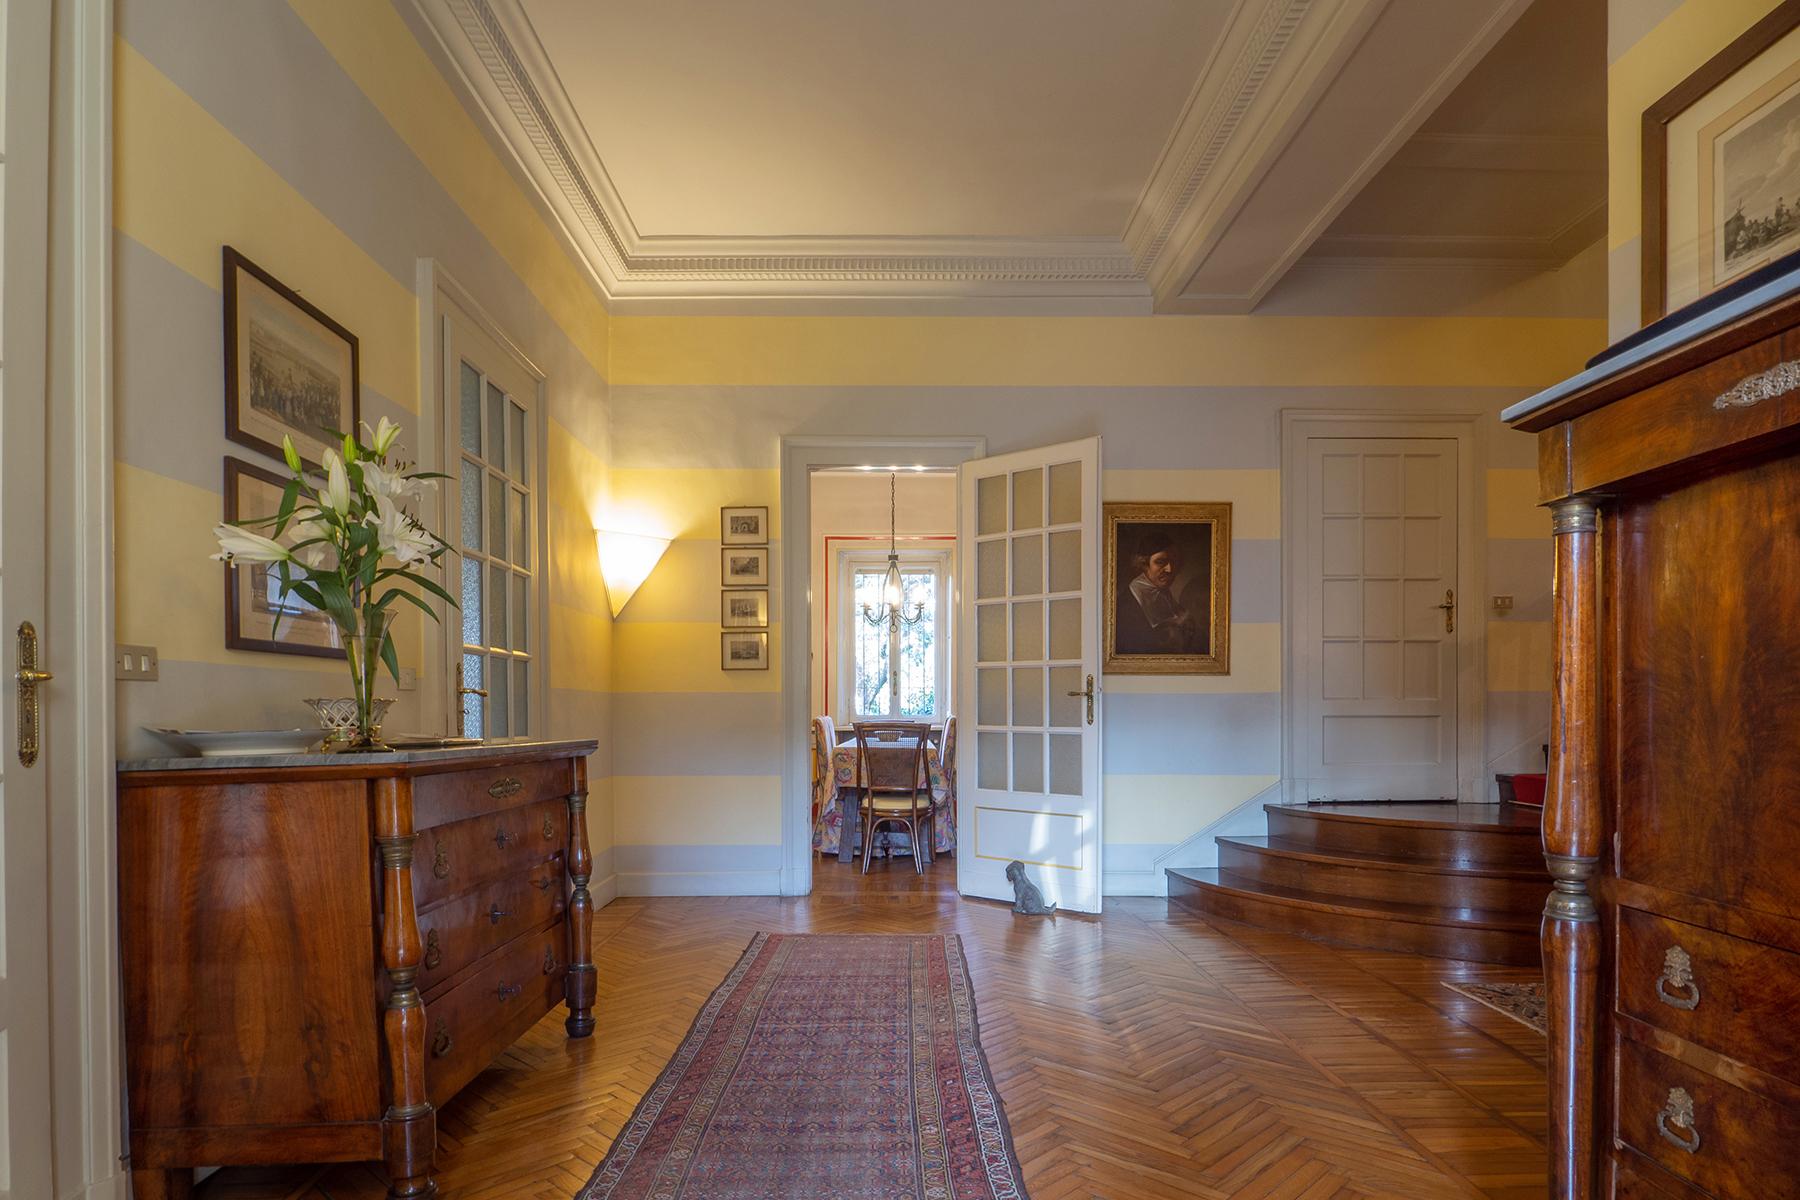 Exquisite villa with swimming pool in the hill of Turin - 6